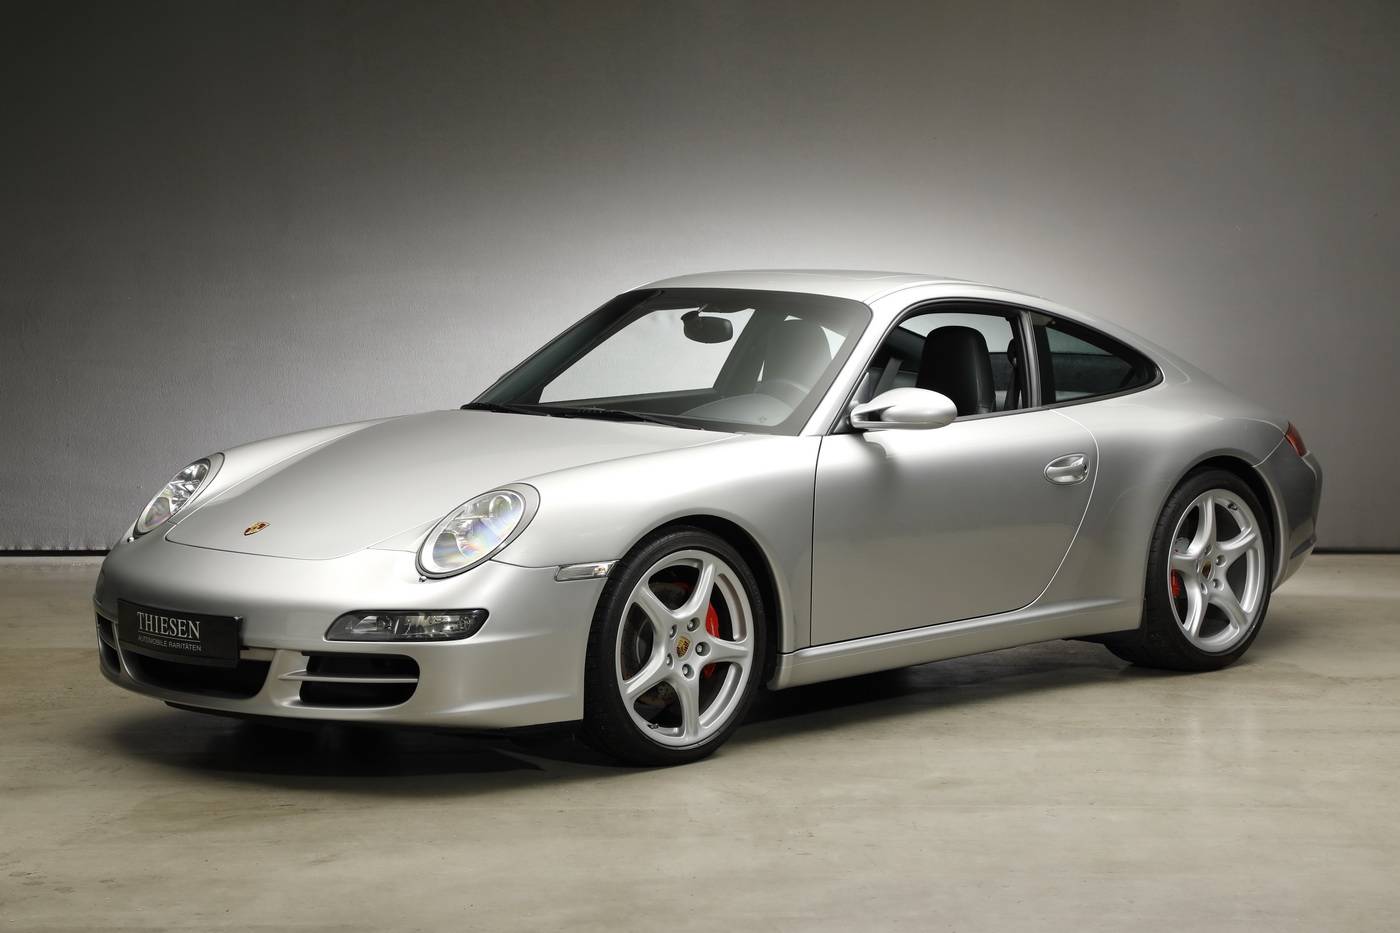 For Sale: Porsche 911 Carrera S (2004) offered for $81,234